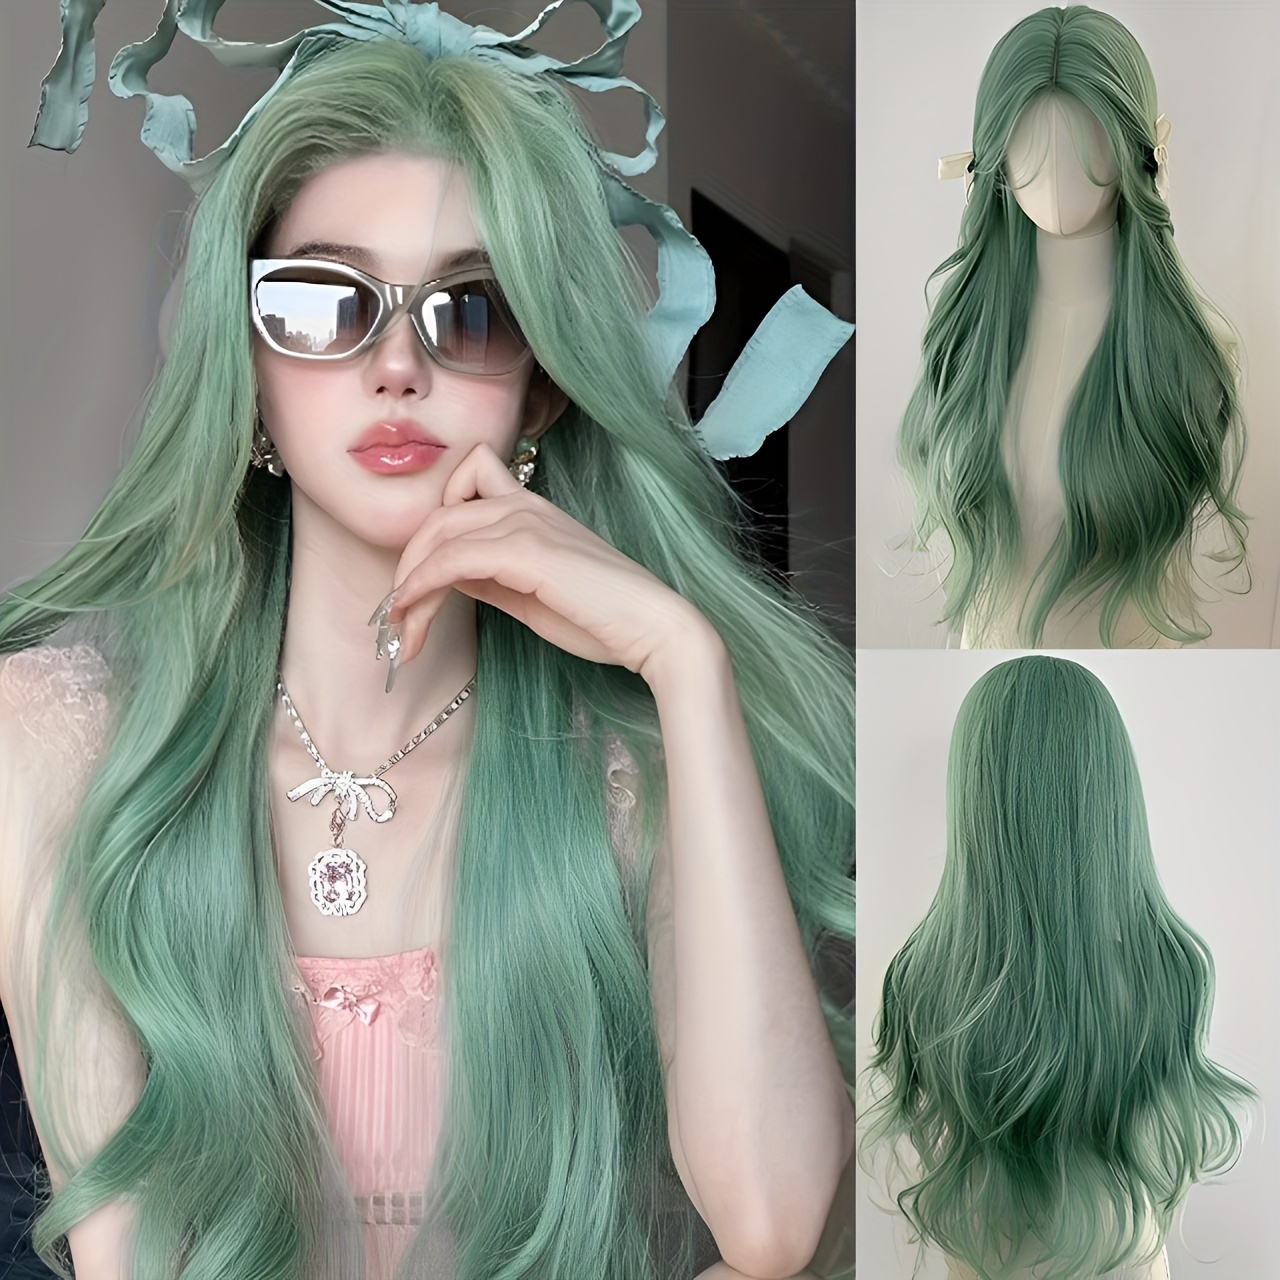 

Elegant 24 Inch Mint Green Long Straight Wig For Women - Versatile Cosplay & Daily Use, High-density Synthetic Hair With Elastic Cap